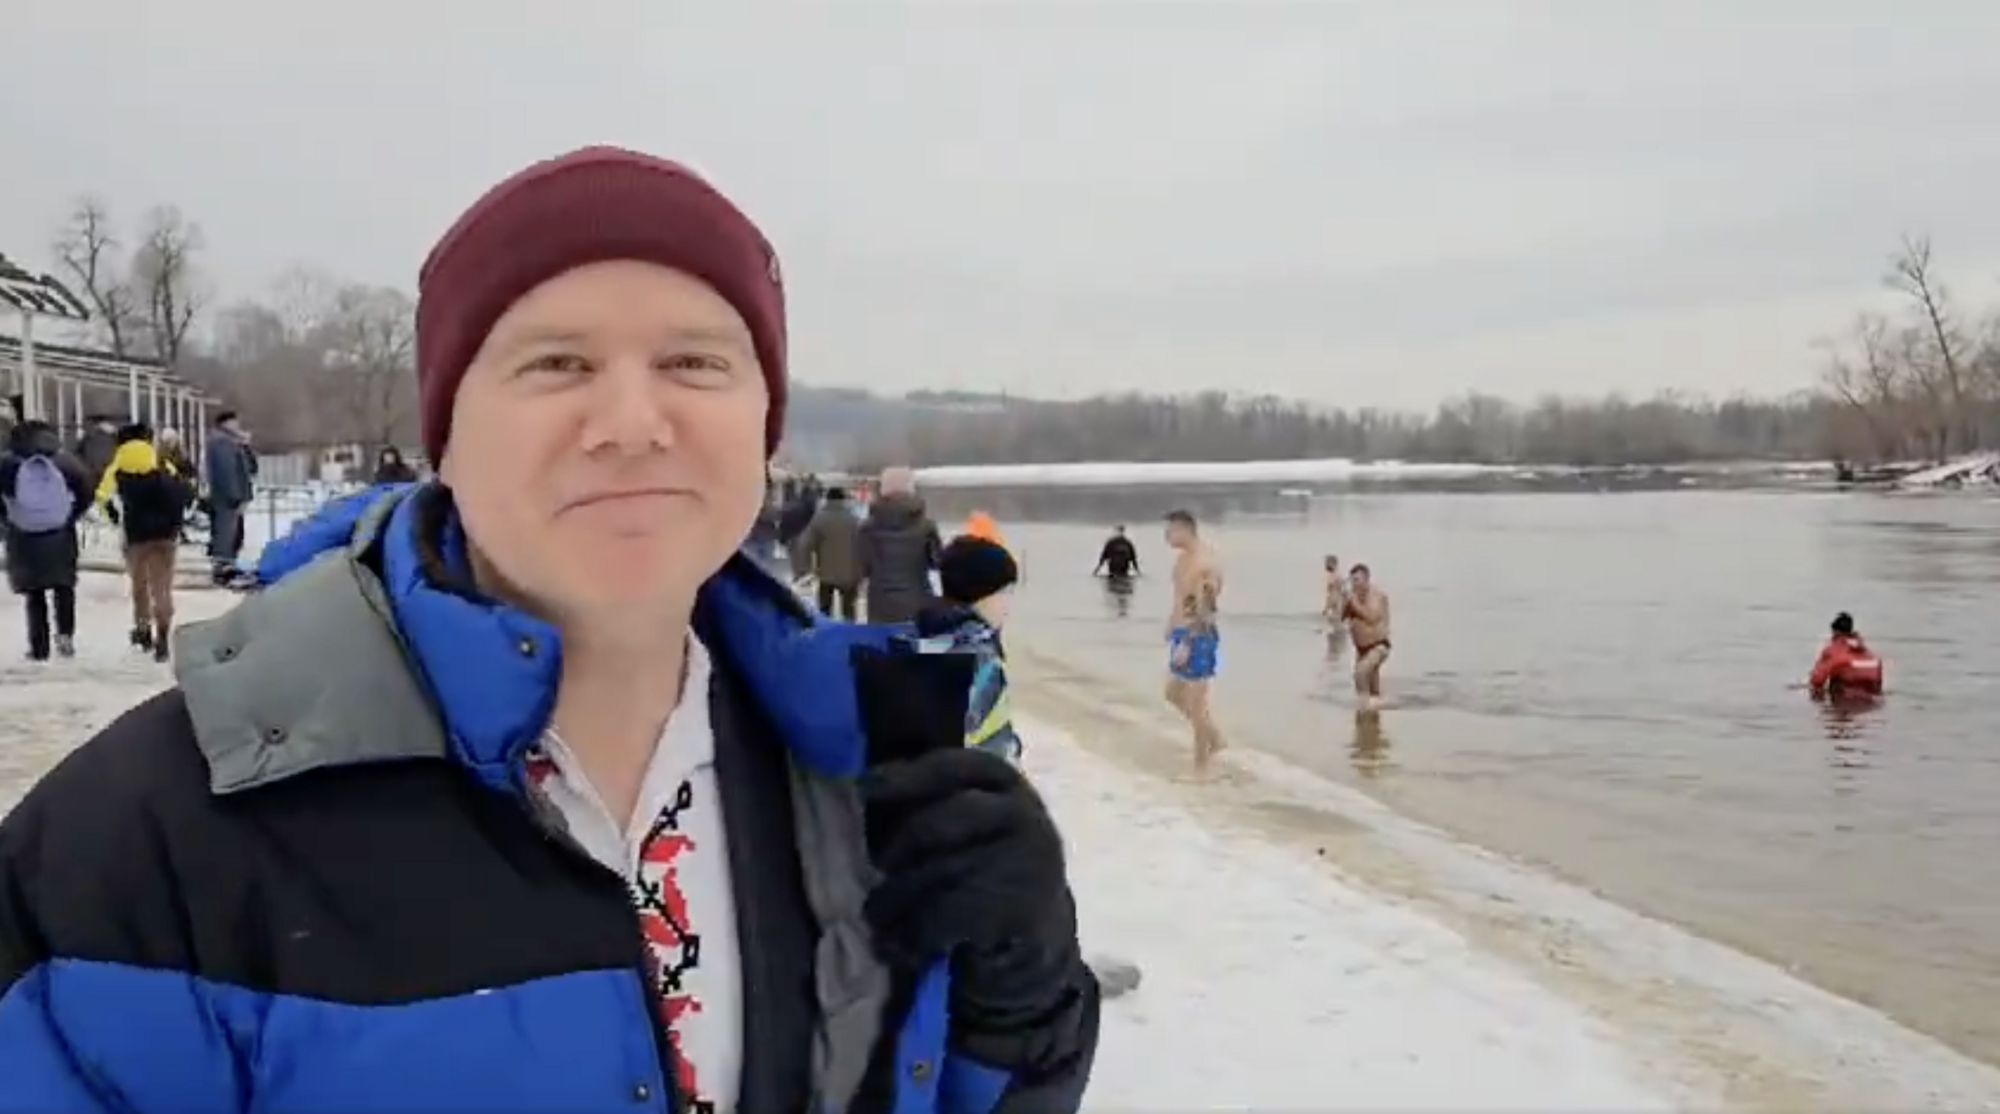 British Ambassador to Ukraine dipped into icy water on the occasion of Epiphany and wished Ukrainians victory